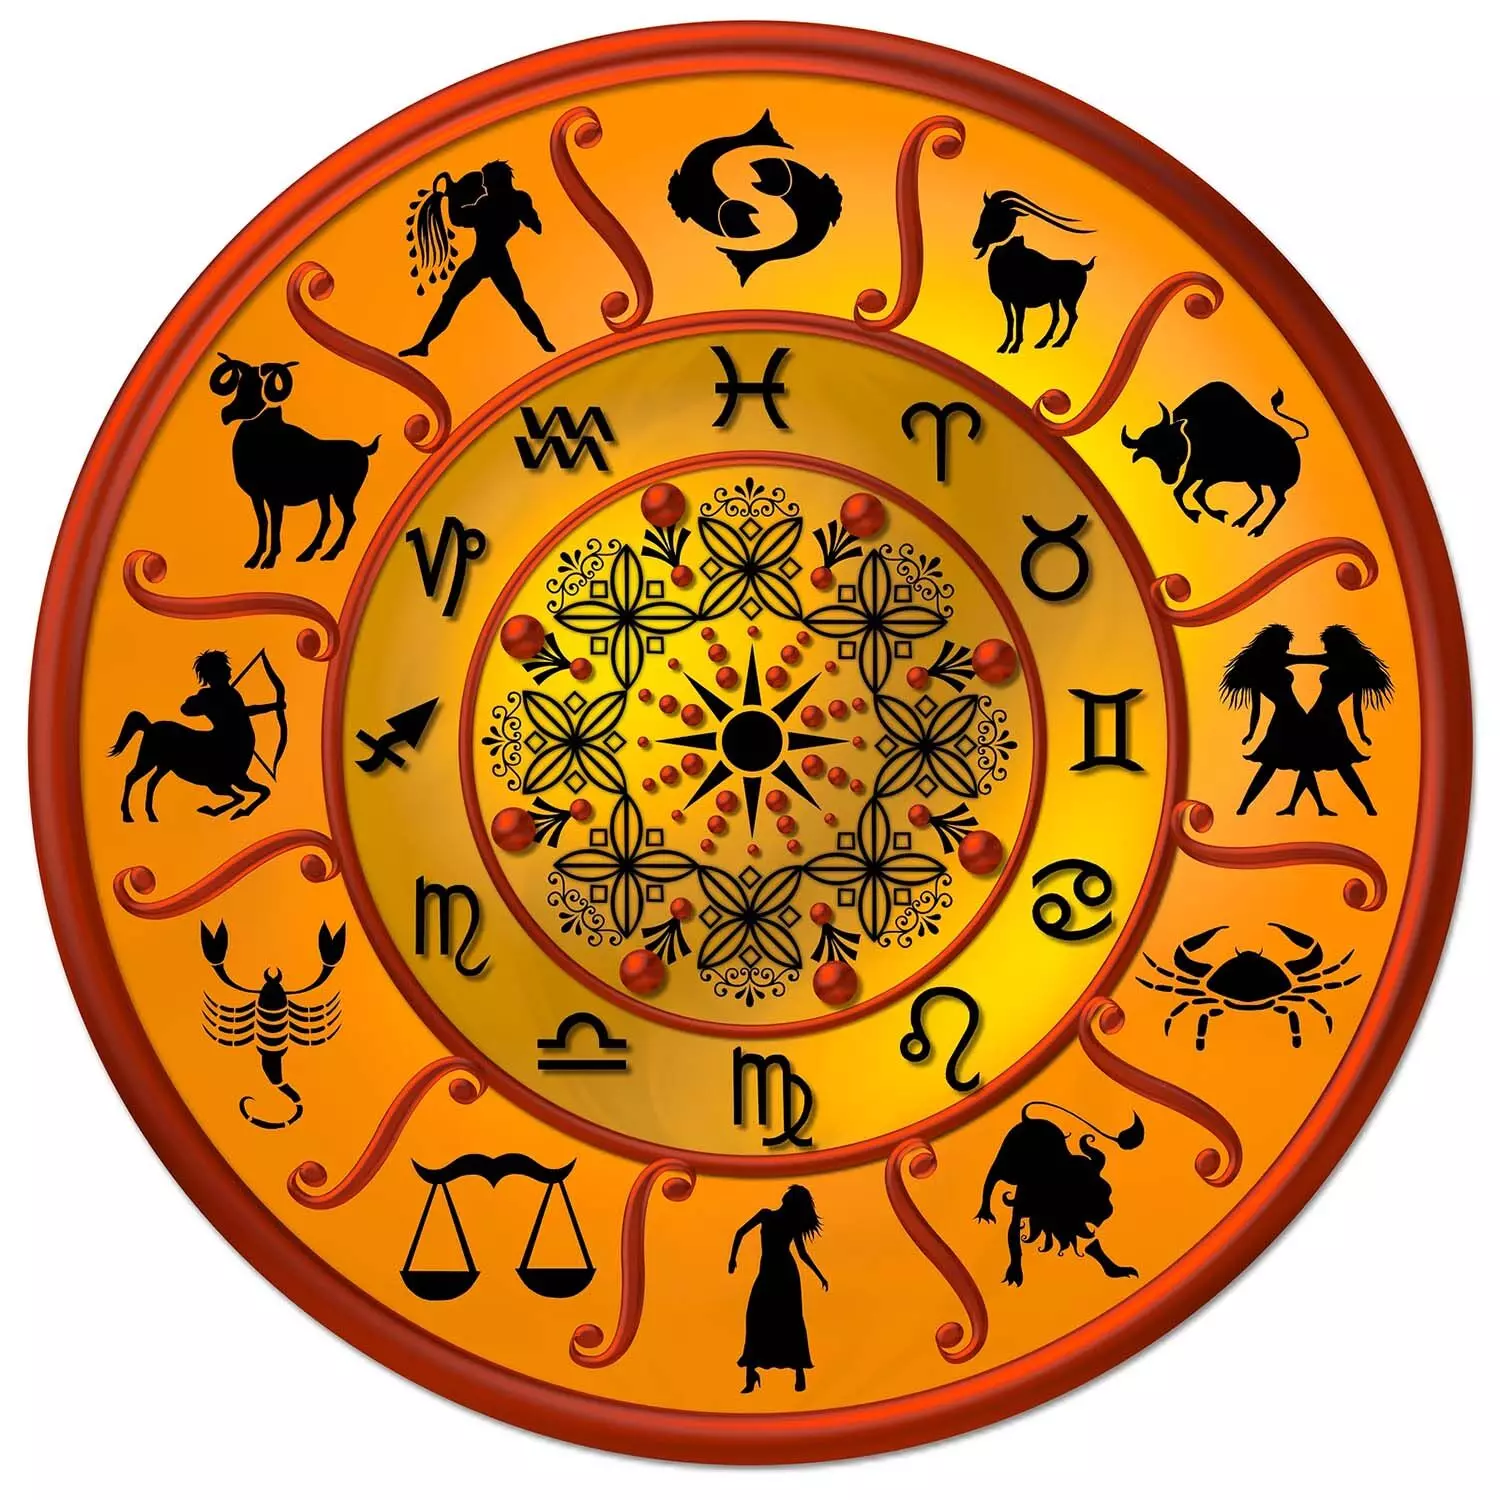 26 June – Know your todays horoscope